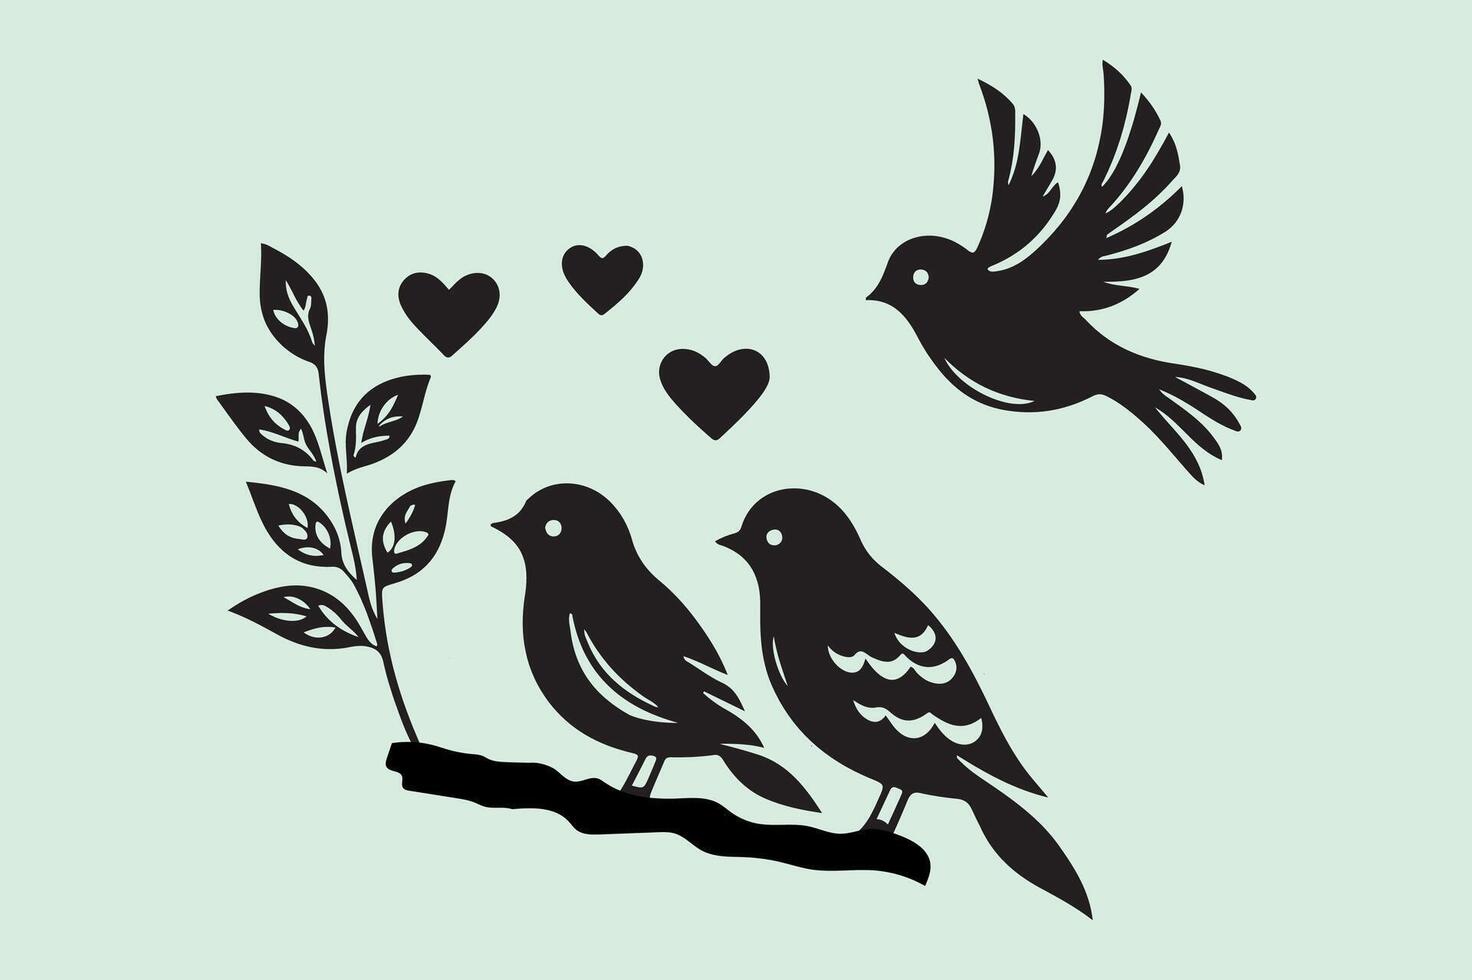 Featuring two birds perched on a branch Illustration free download vector